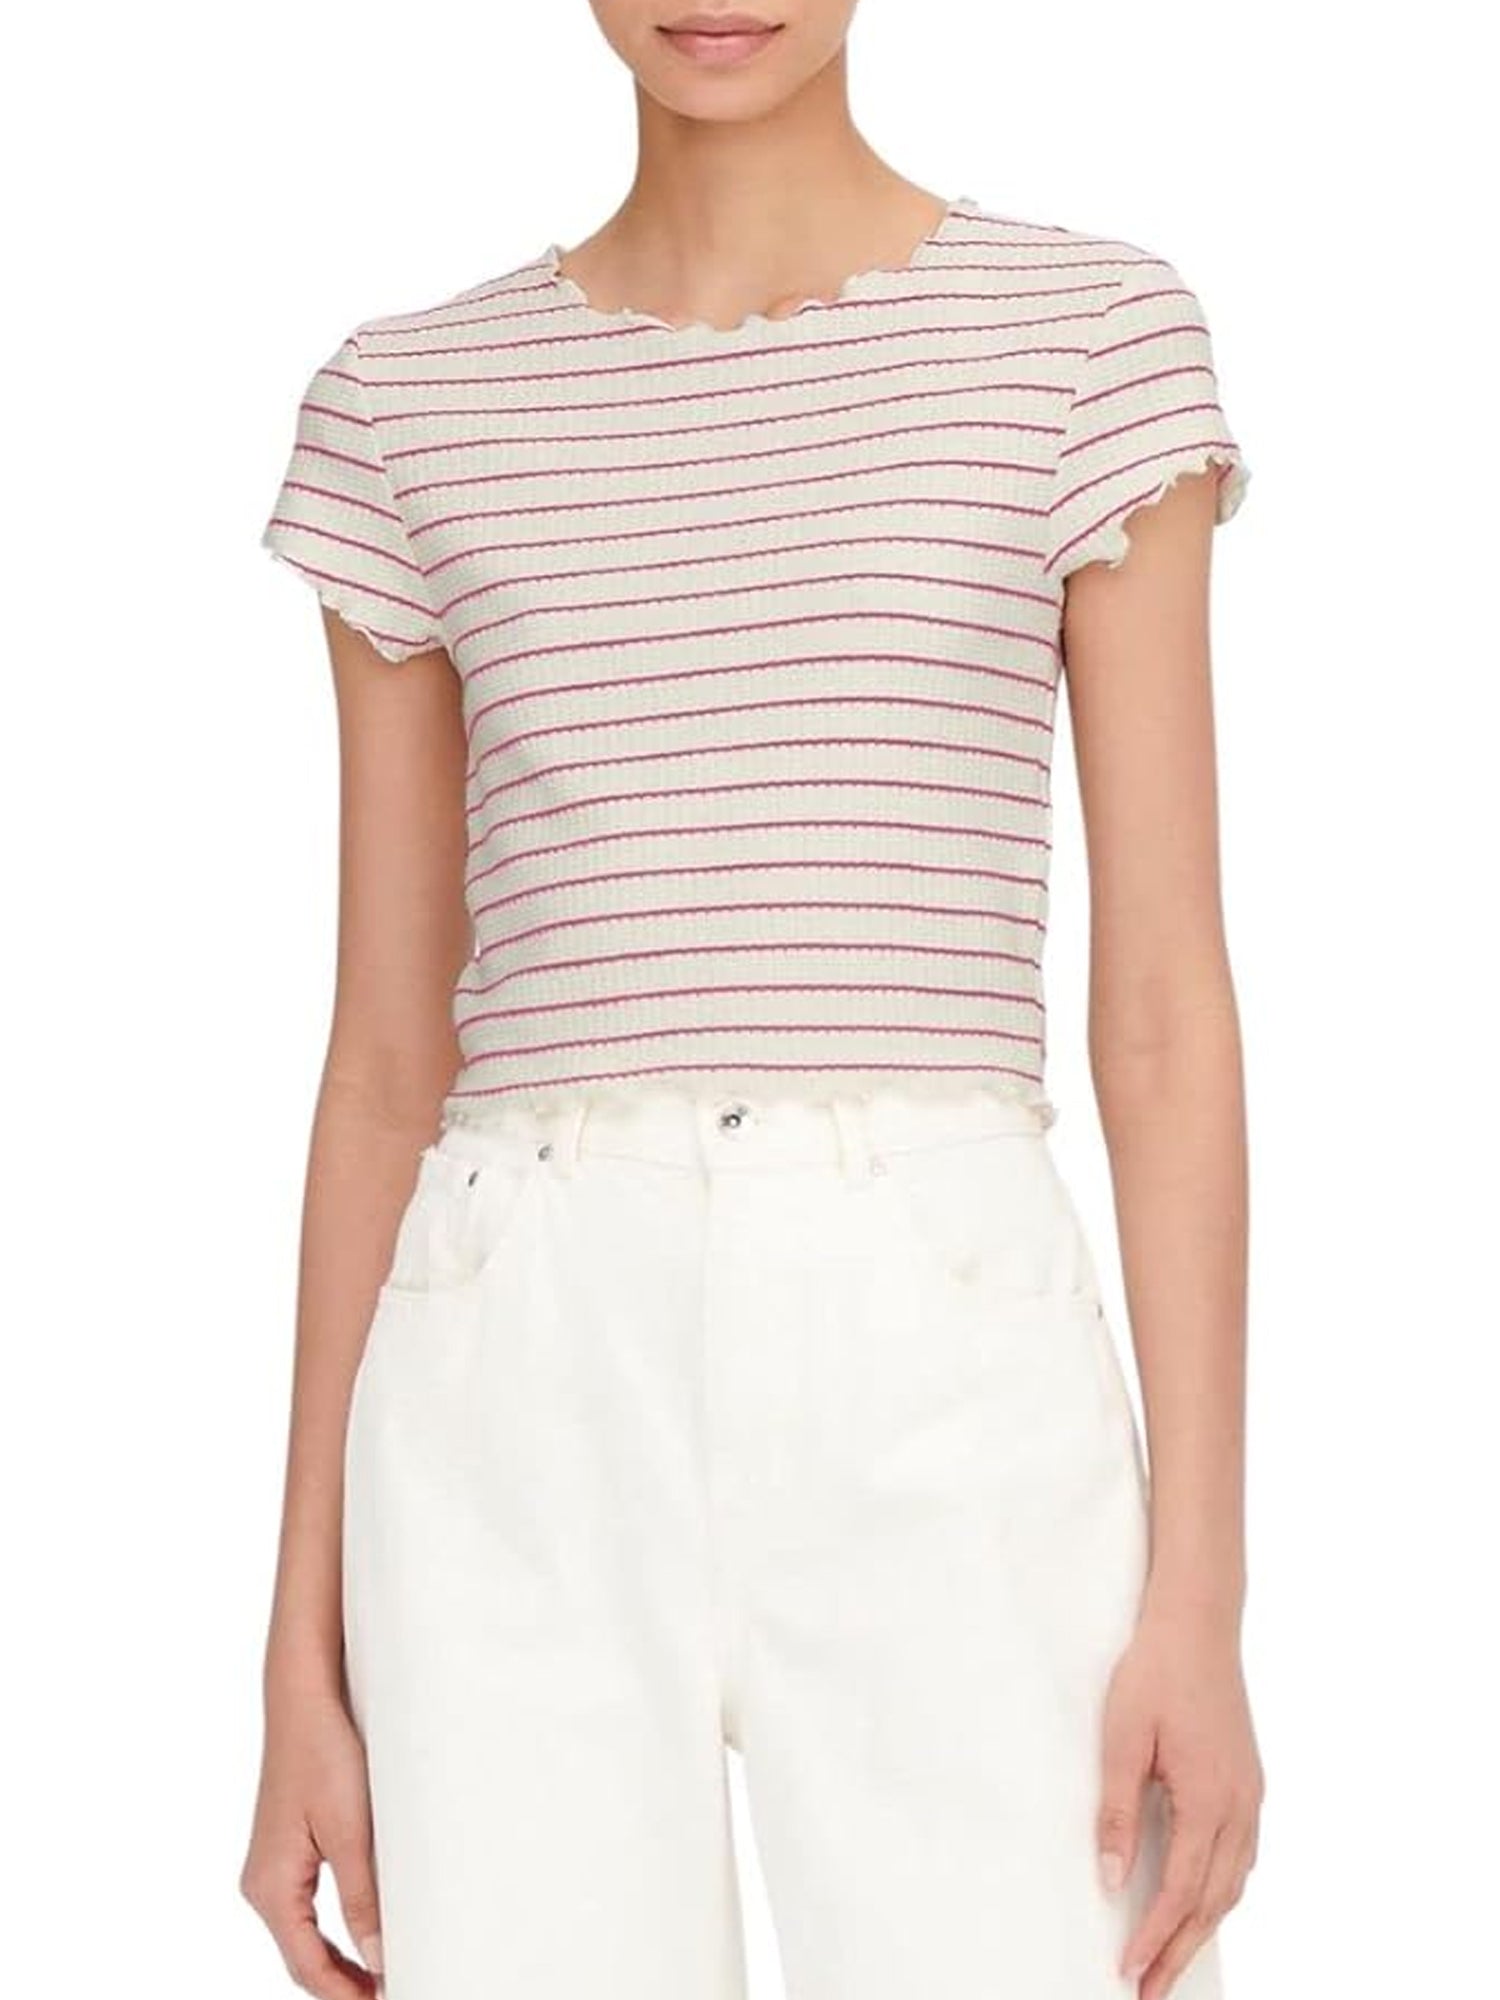 ONLY T-SHIRT CROPPED ANITS A RIGHE BIANCO - ROSA